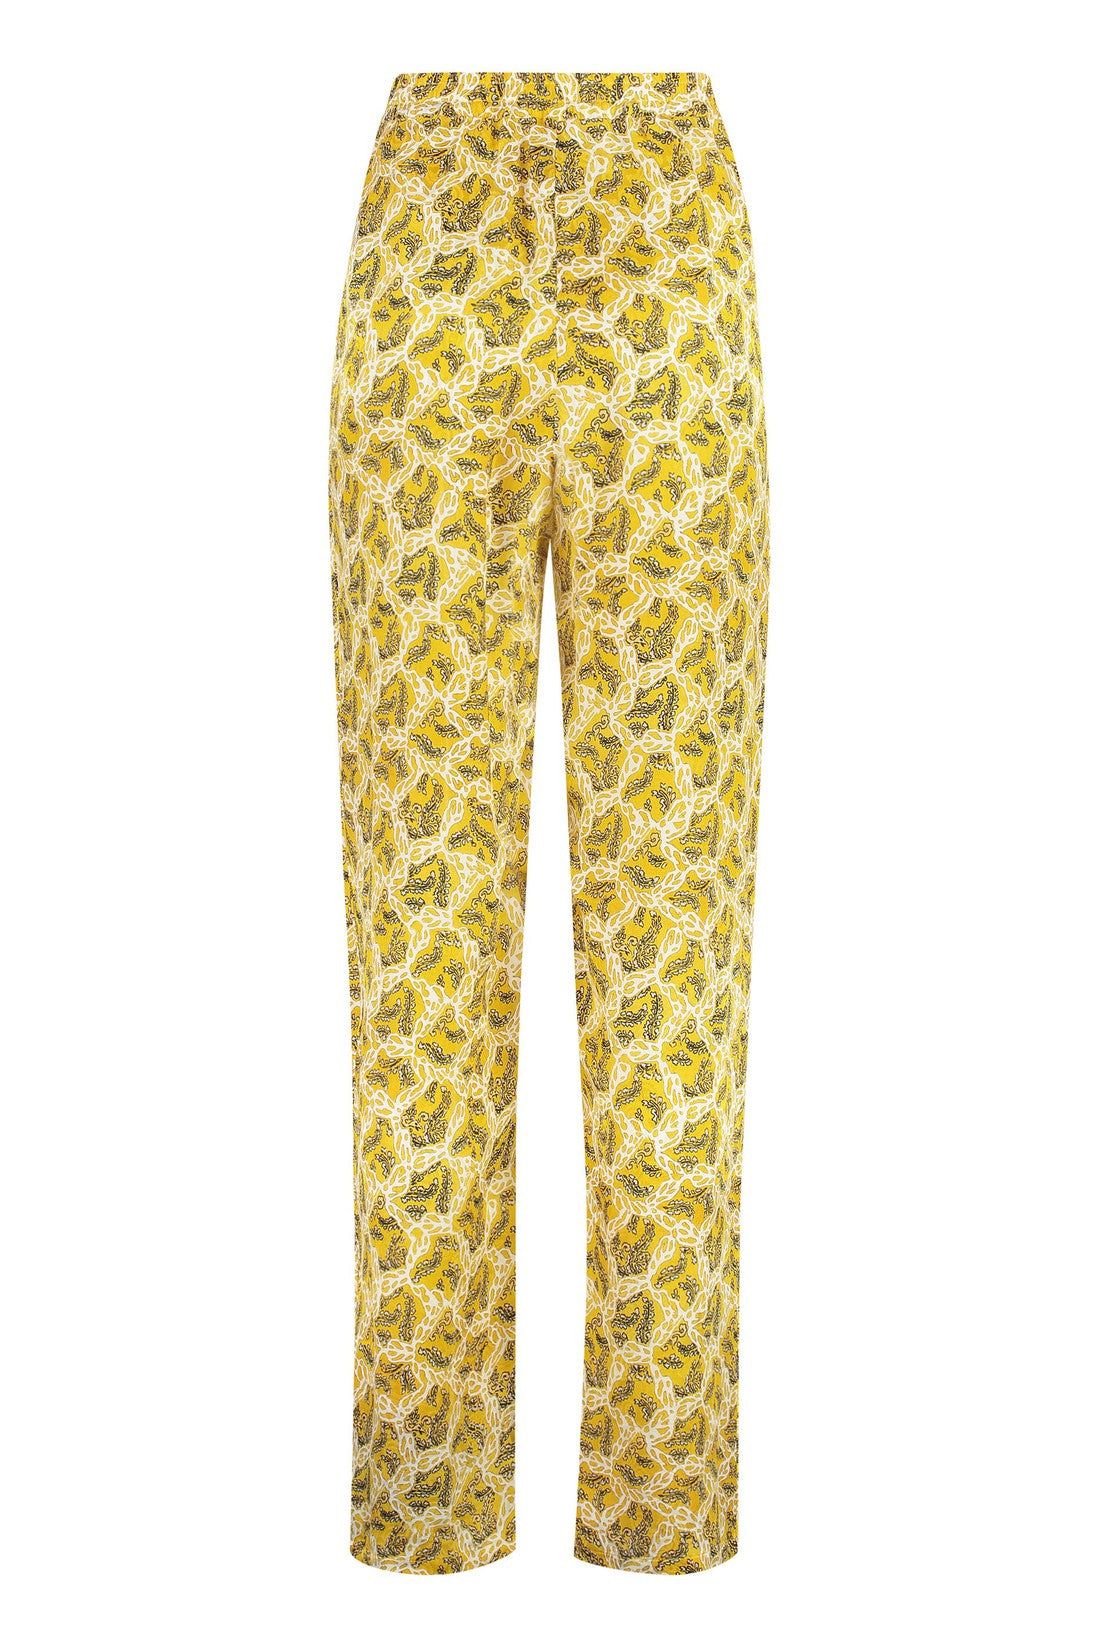 Isabel Marant-OUTLET-SALE-Piera Printed high-rise trousers-ARCHIVIST